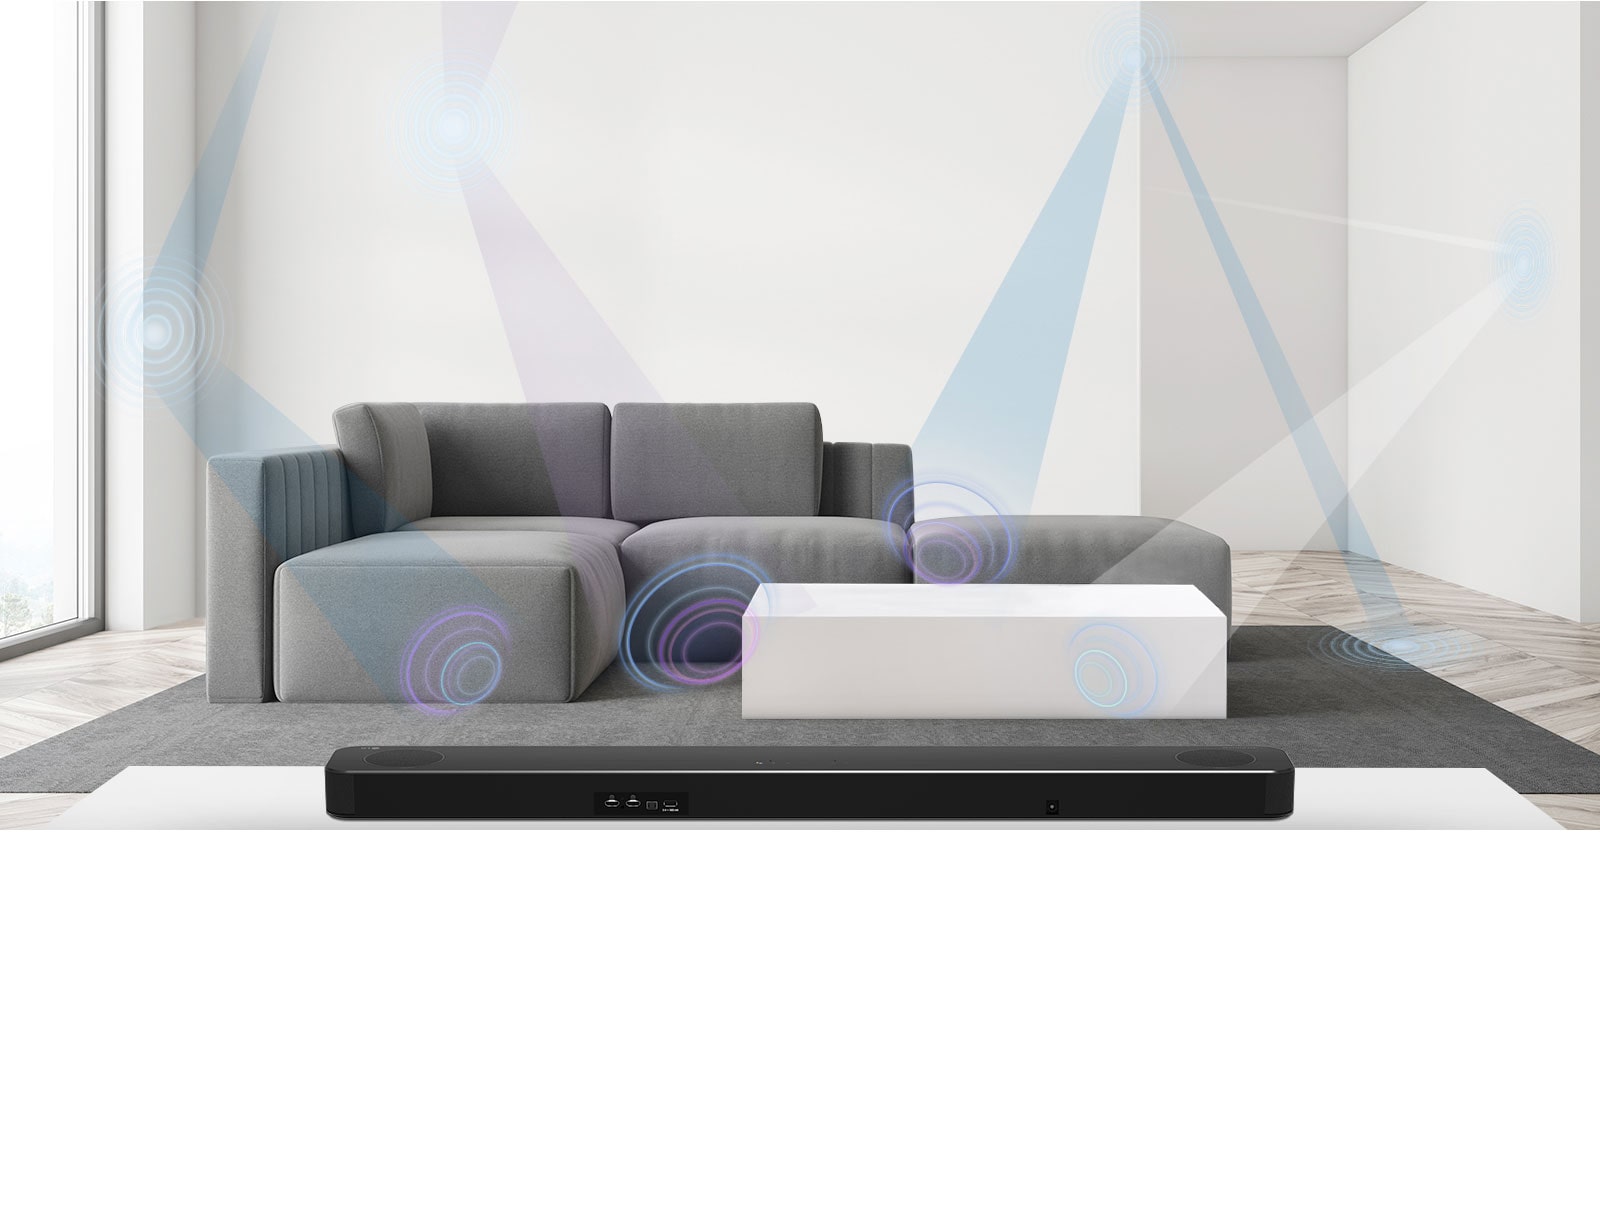 Back of LG Soundbar in living room with gray sofa in the center. Graphics of the wavelength measuring the space are shown.